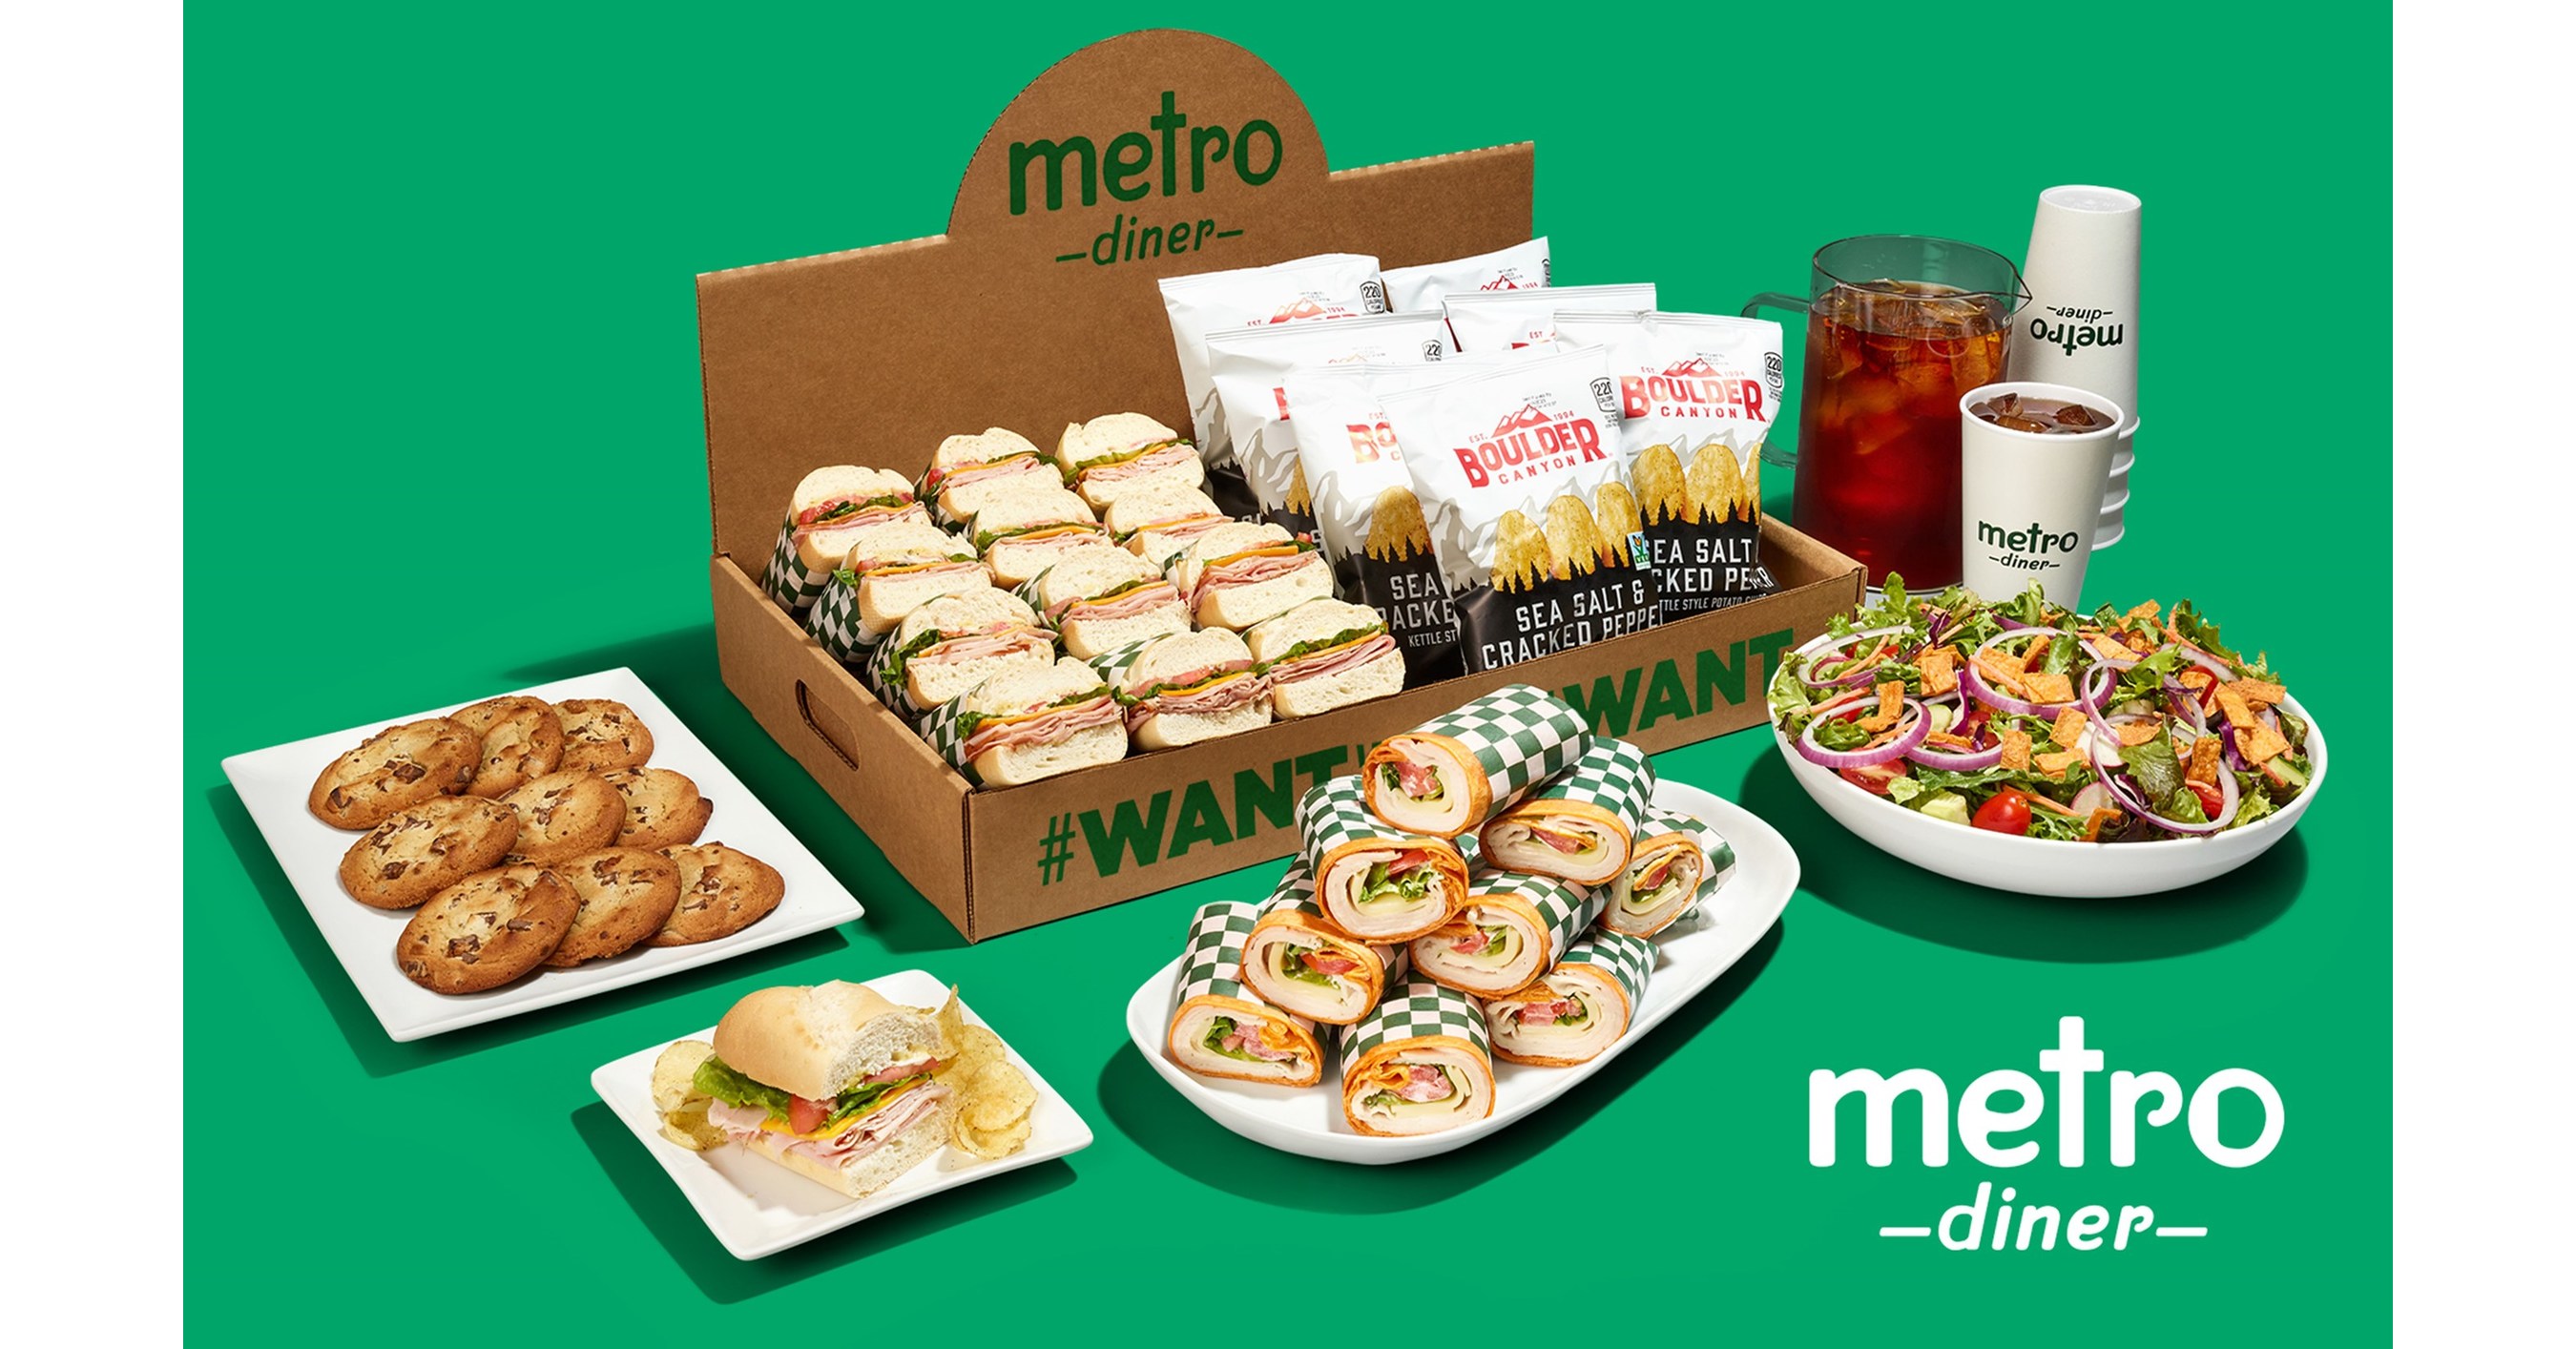 METRO DINER COOKS UP A CROWD-PLEASING CATERING MENU, LAUNCHES NEW SANDWICH PLATTER